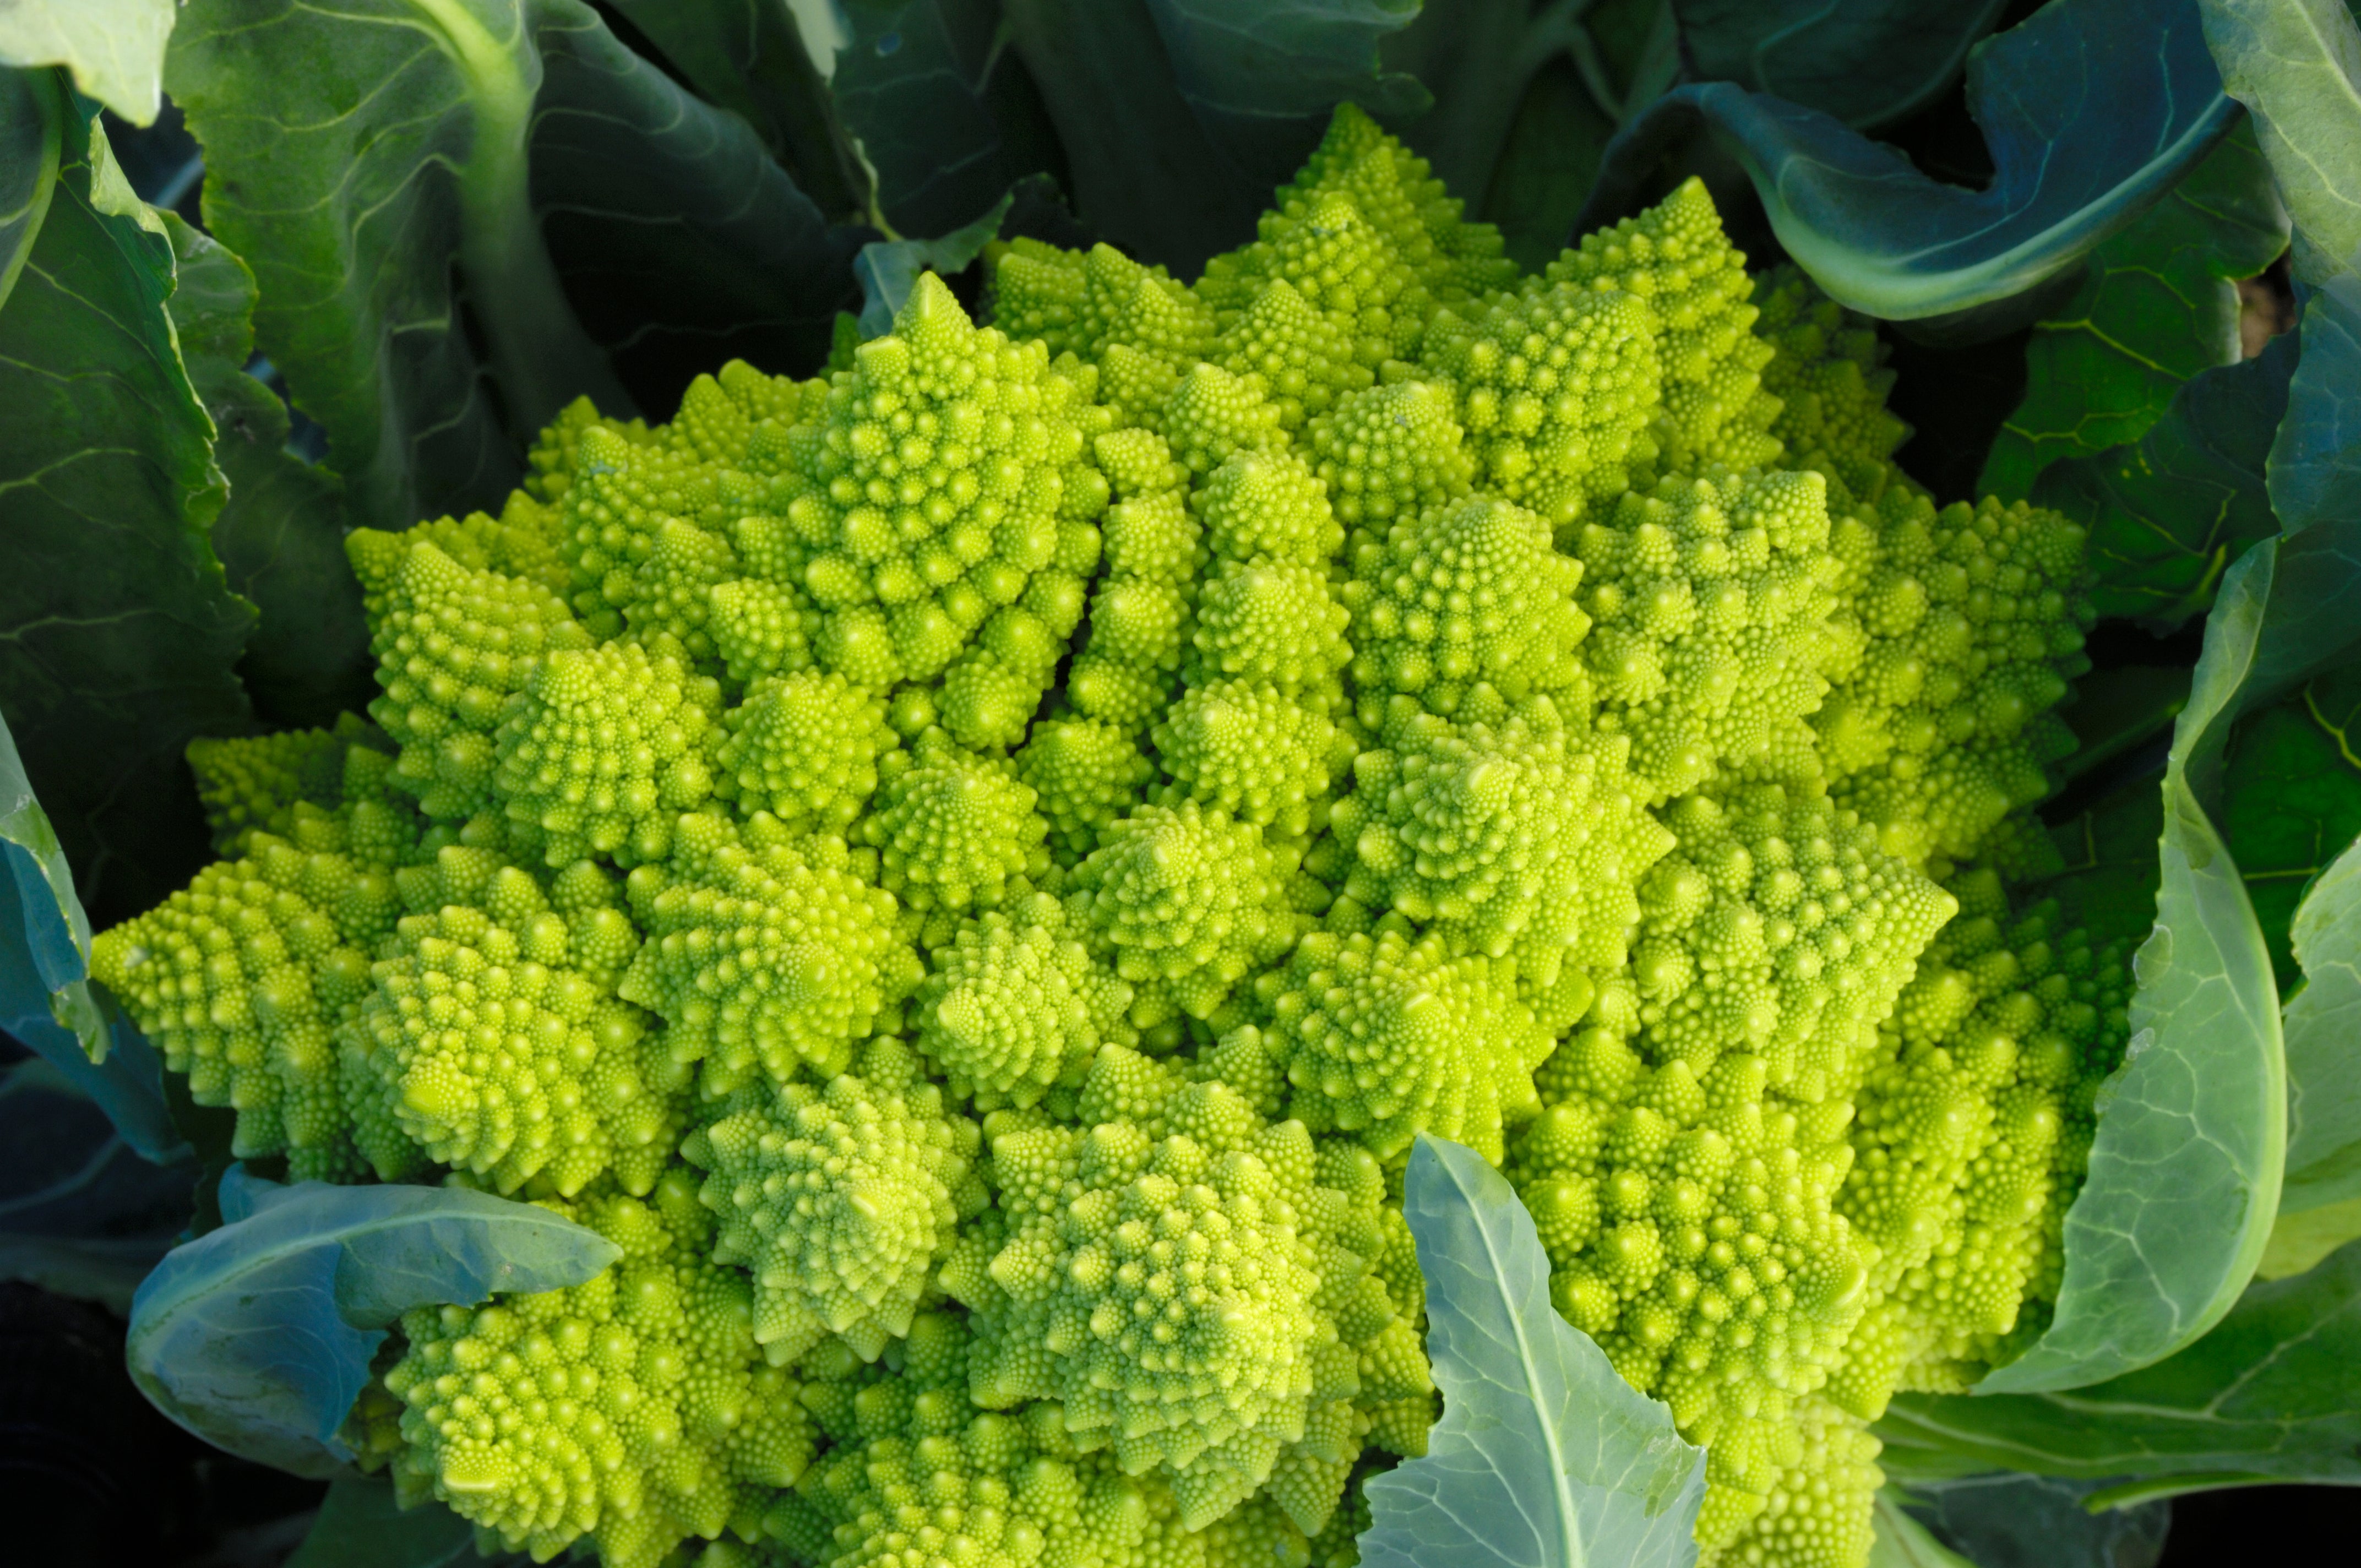 Engrossing greens: the endlessly fascinating patterns of the romanesco cauliflower